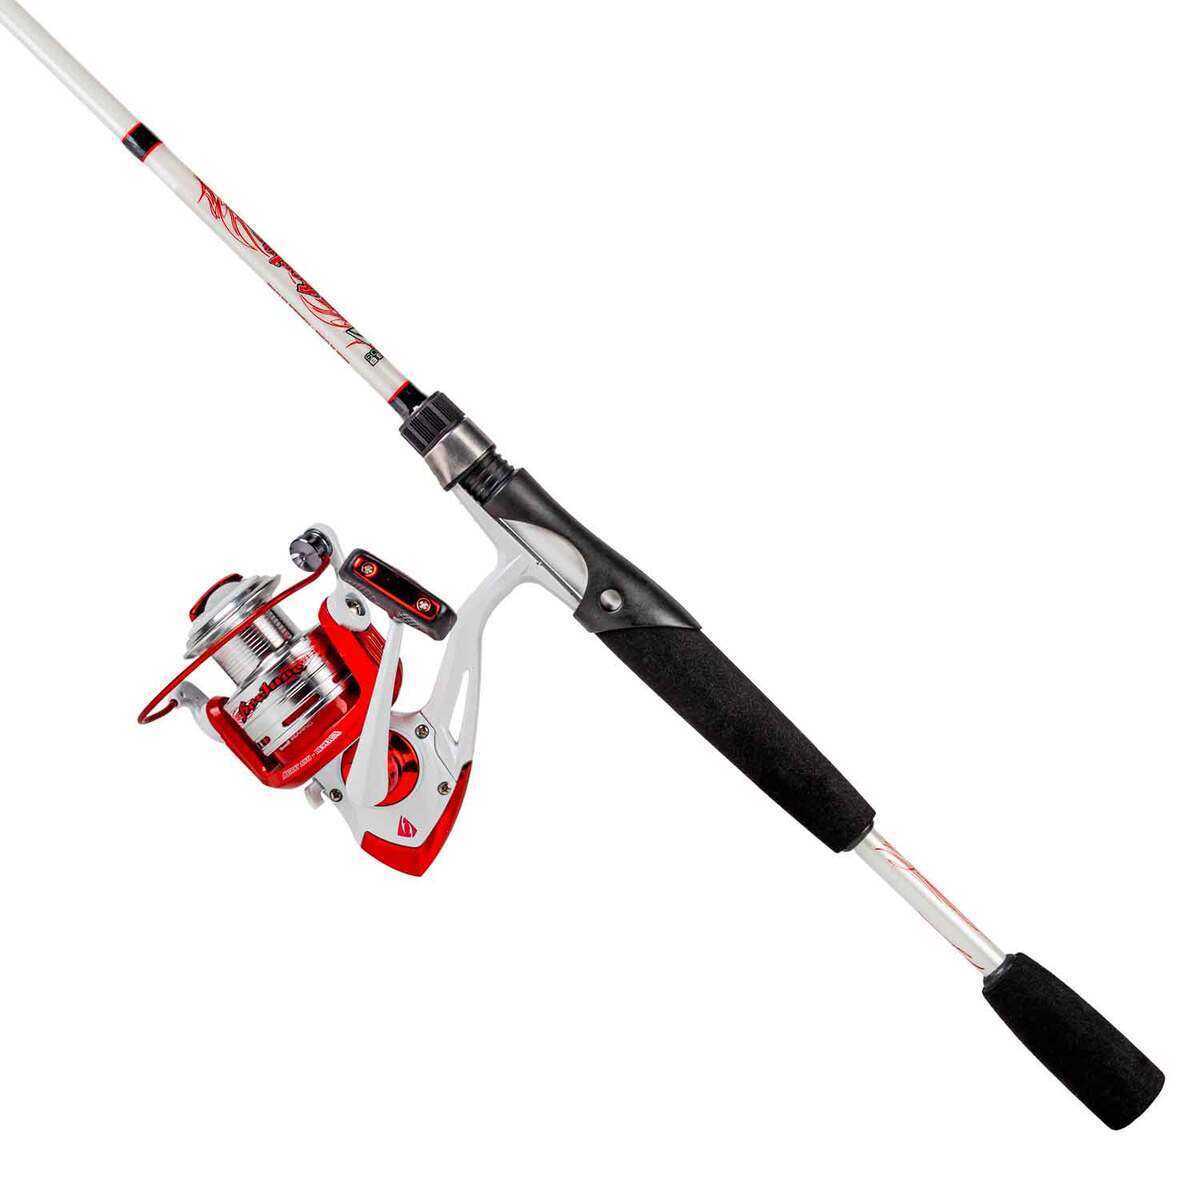 South Bend Black Beauty2 7ft. 2 Pc MH Spinning Fishing Rod and Reel Combo —  CampSaver